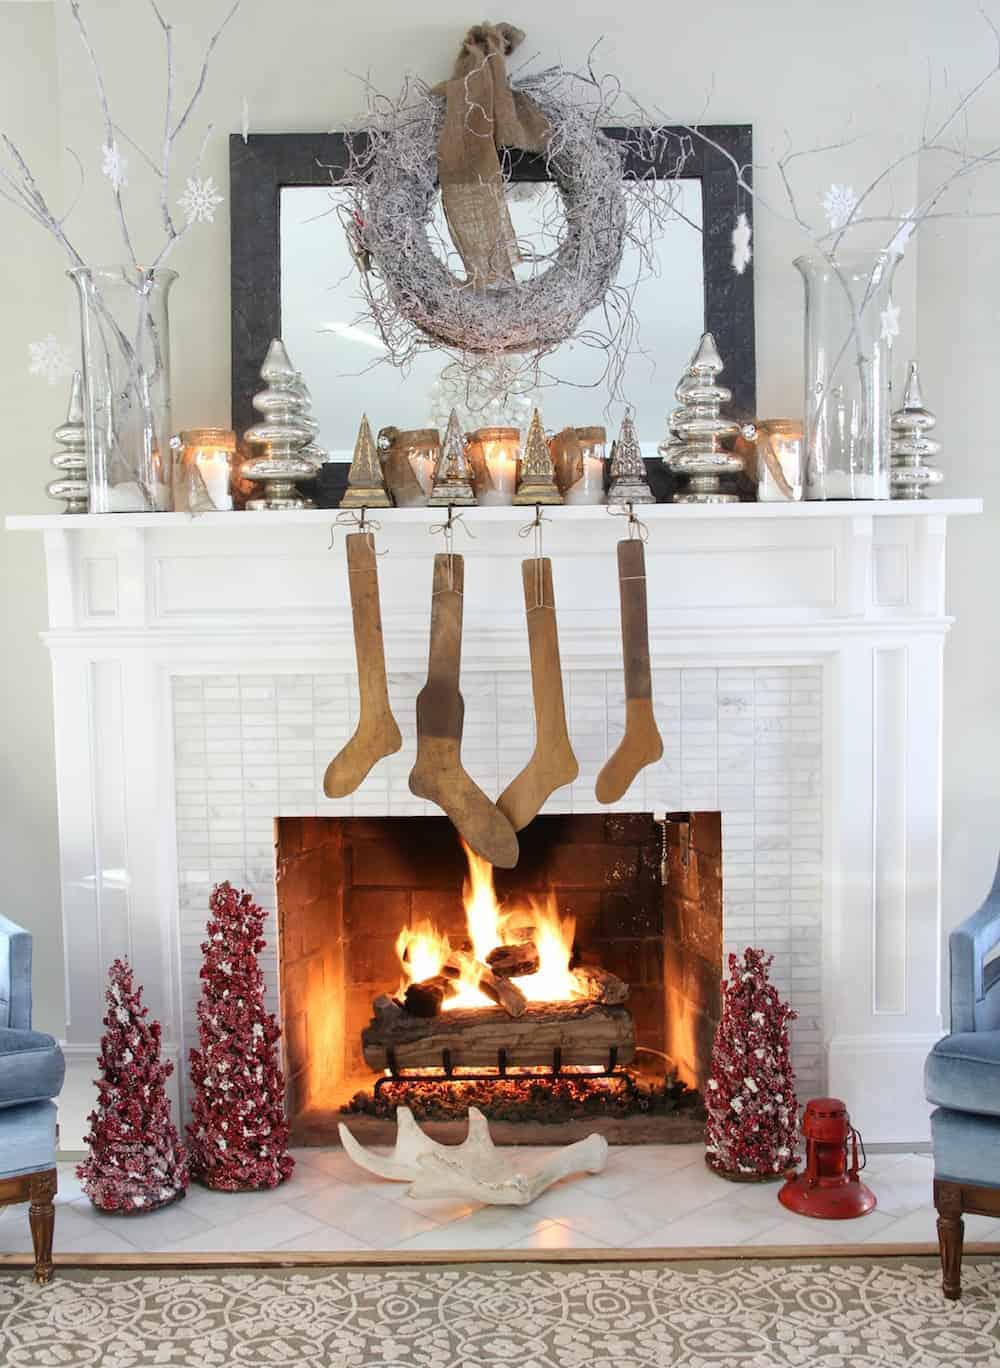 candlw qirh nusw Christmas Mantel Decorations That Give Santa A Cozy Welcoming